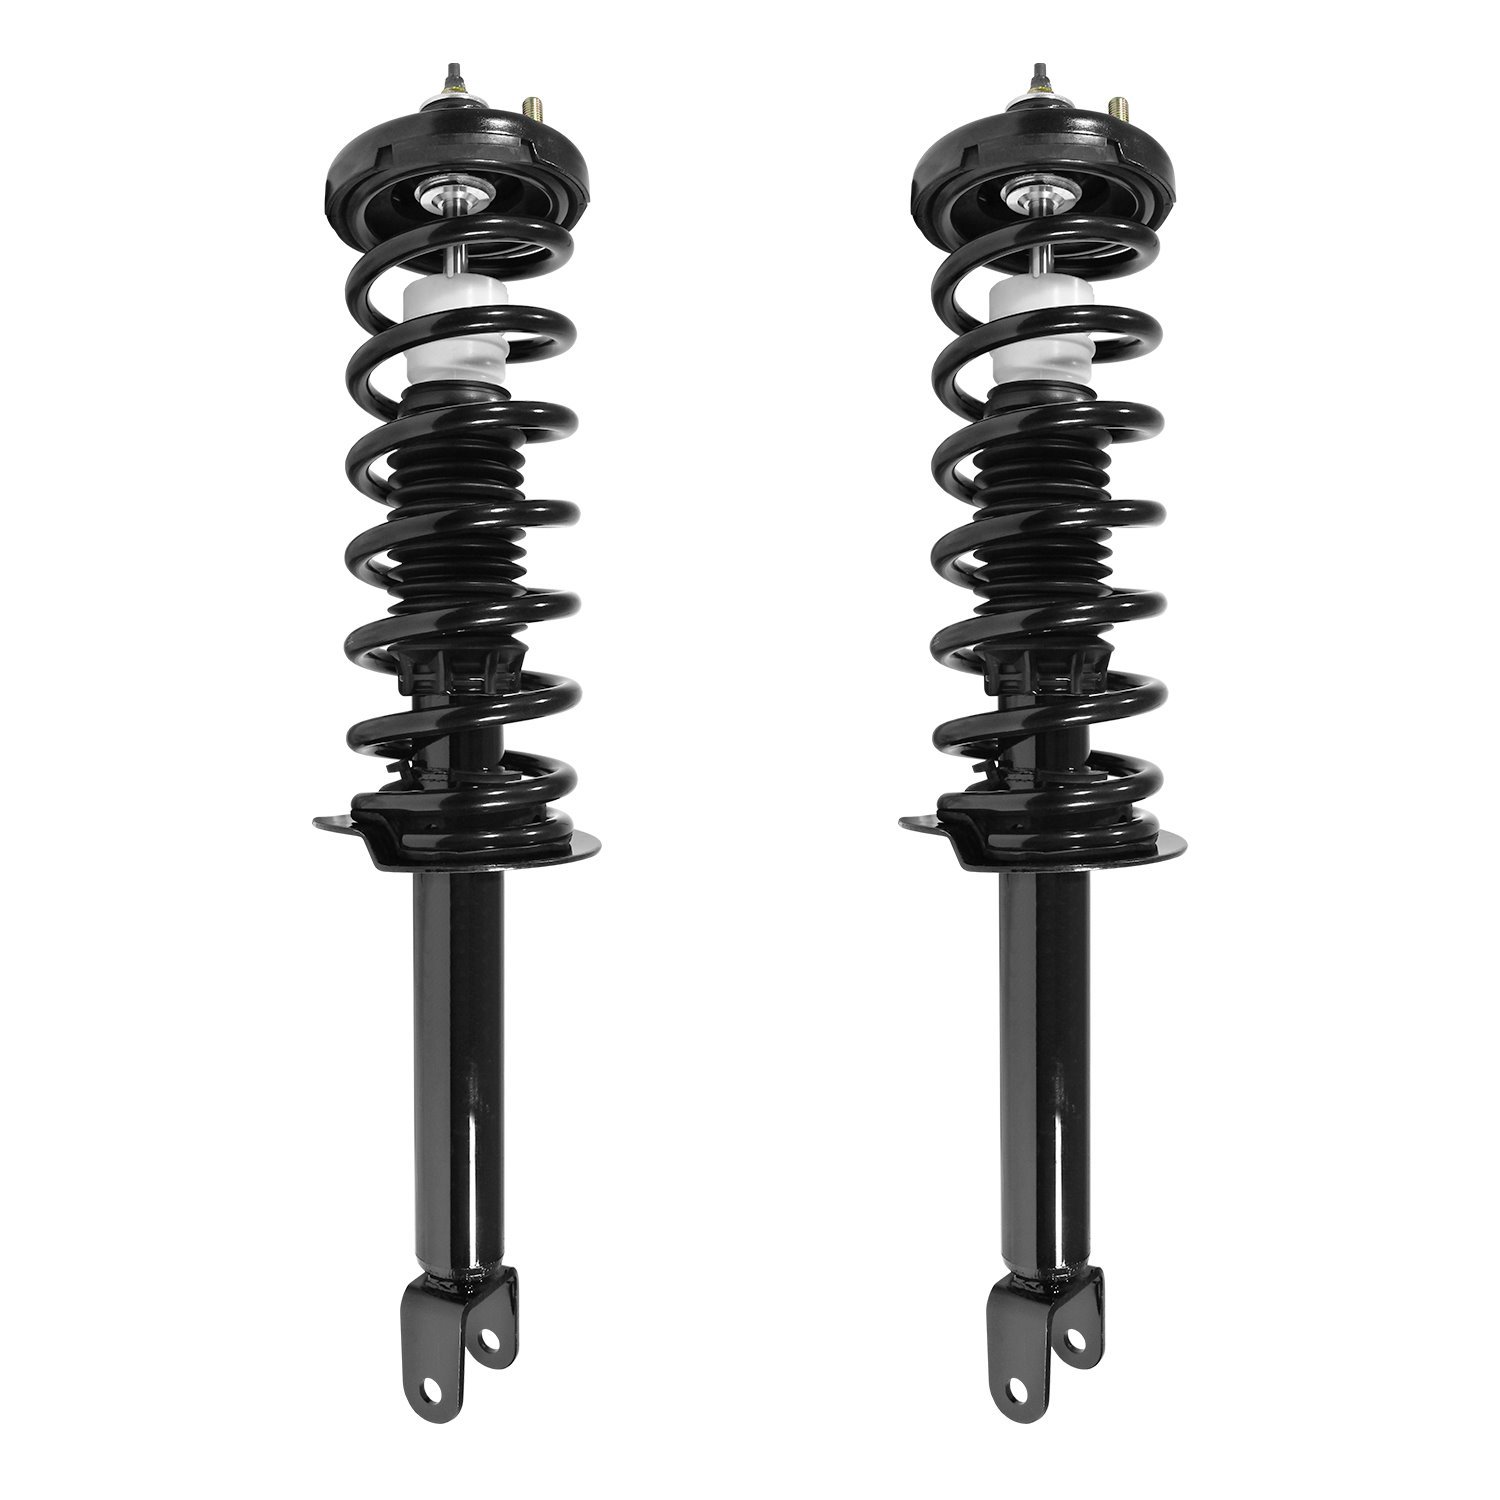 2-15180-001 Suspension Strut & Coil Spring Assembly Set Fits Select Honda Accord